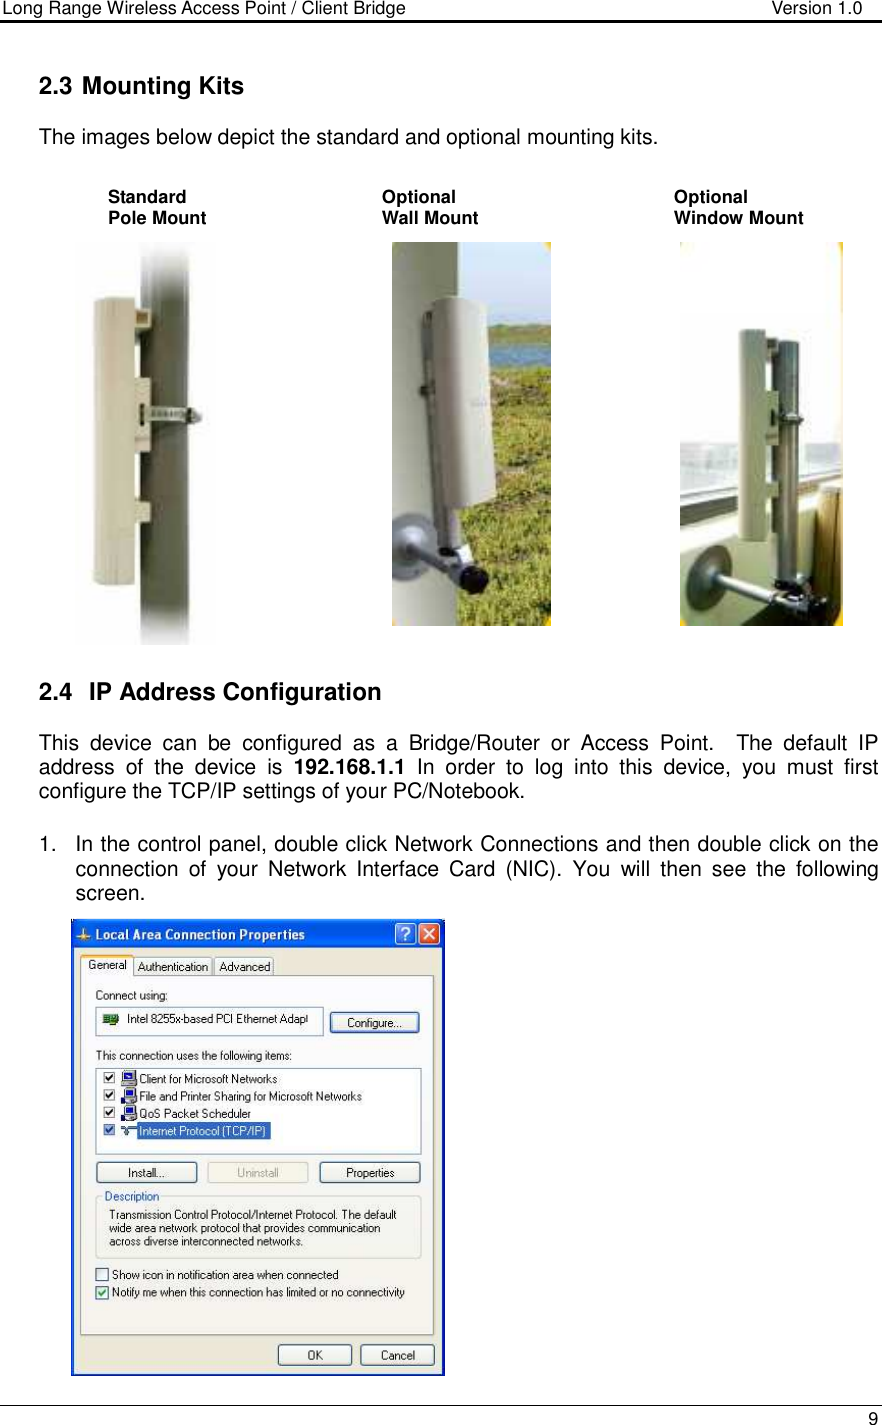 Long Range Wireless Access Point / Client Bridge                                   Version 1.0    9  2.3  Mounting Kits The images below depict the standard and optional mounting kits.                      2.4   IP Address Configuration This  device  can  be  configured  as  a  Bridge/Router  or  Access  Point.    The  default  IP address  of  the  device  is  192.168.1.1  In  order  to  log  into  this  device,  you  must  first configure the TCP/IP settings of your PC/Notebook.   1.  In the control panel, double click Network Connections and then double click on the connection  of  your  Network  Interface  Card  (NIC).  You  will  then  see  the  following screen.                     Standard  Pole Mount Optional Wall Mount Optional Window Mount 